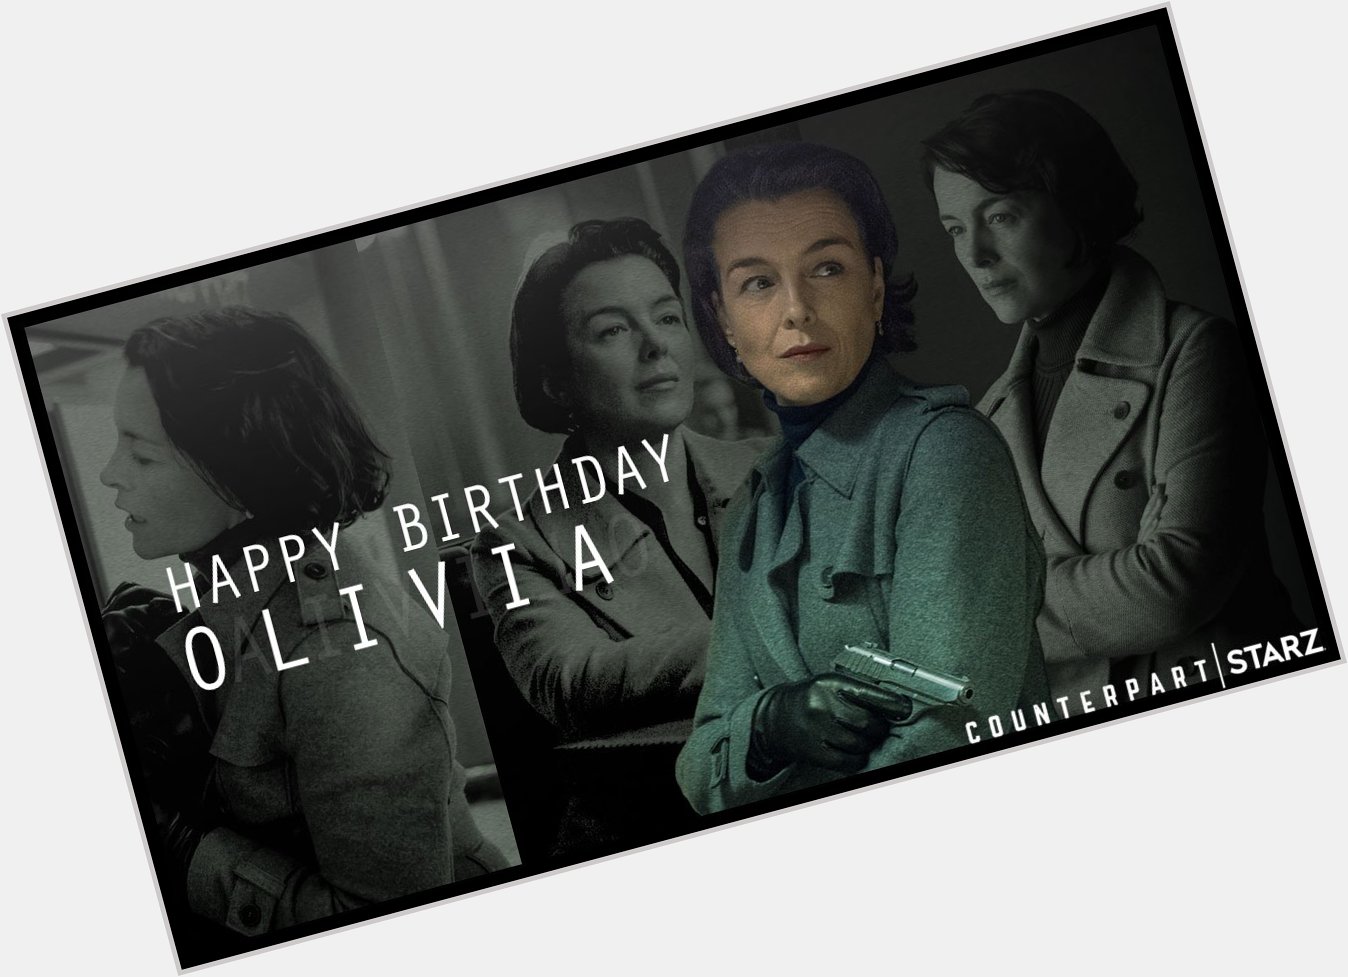 Agents, join us in wishing Olivia Williams a very happy birthday. 